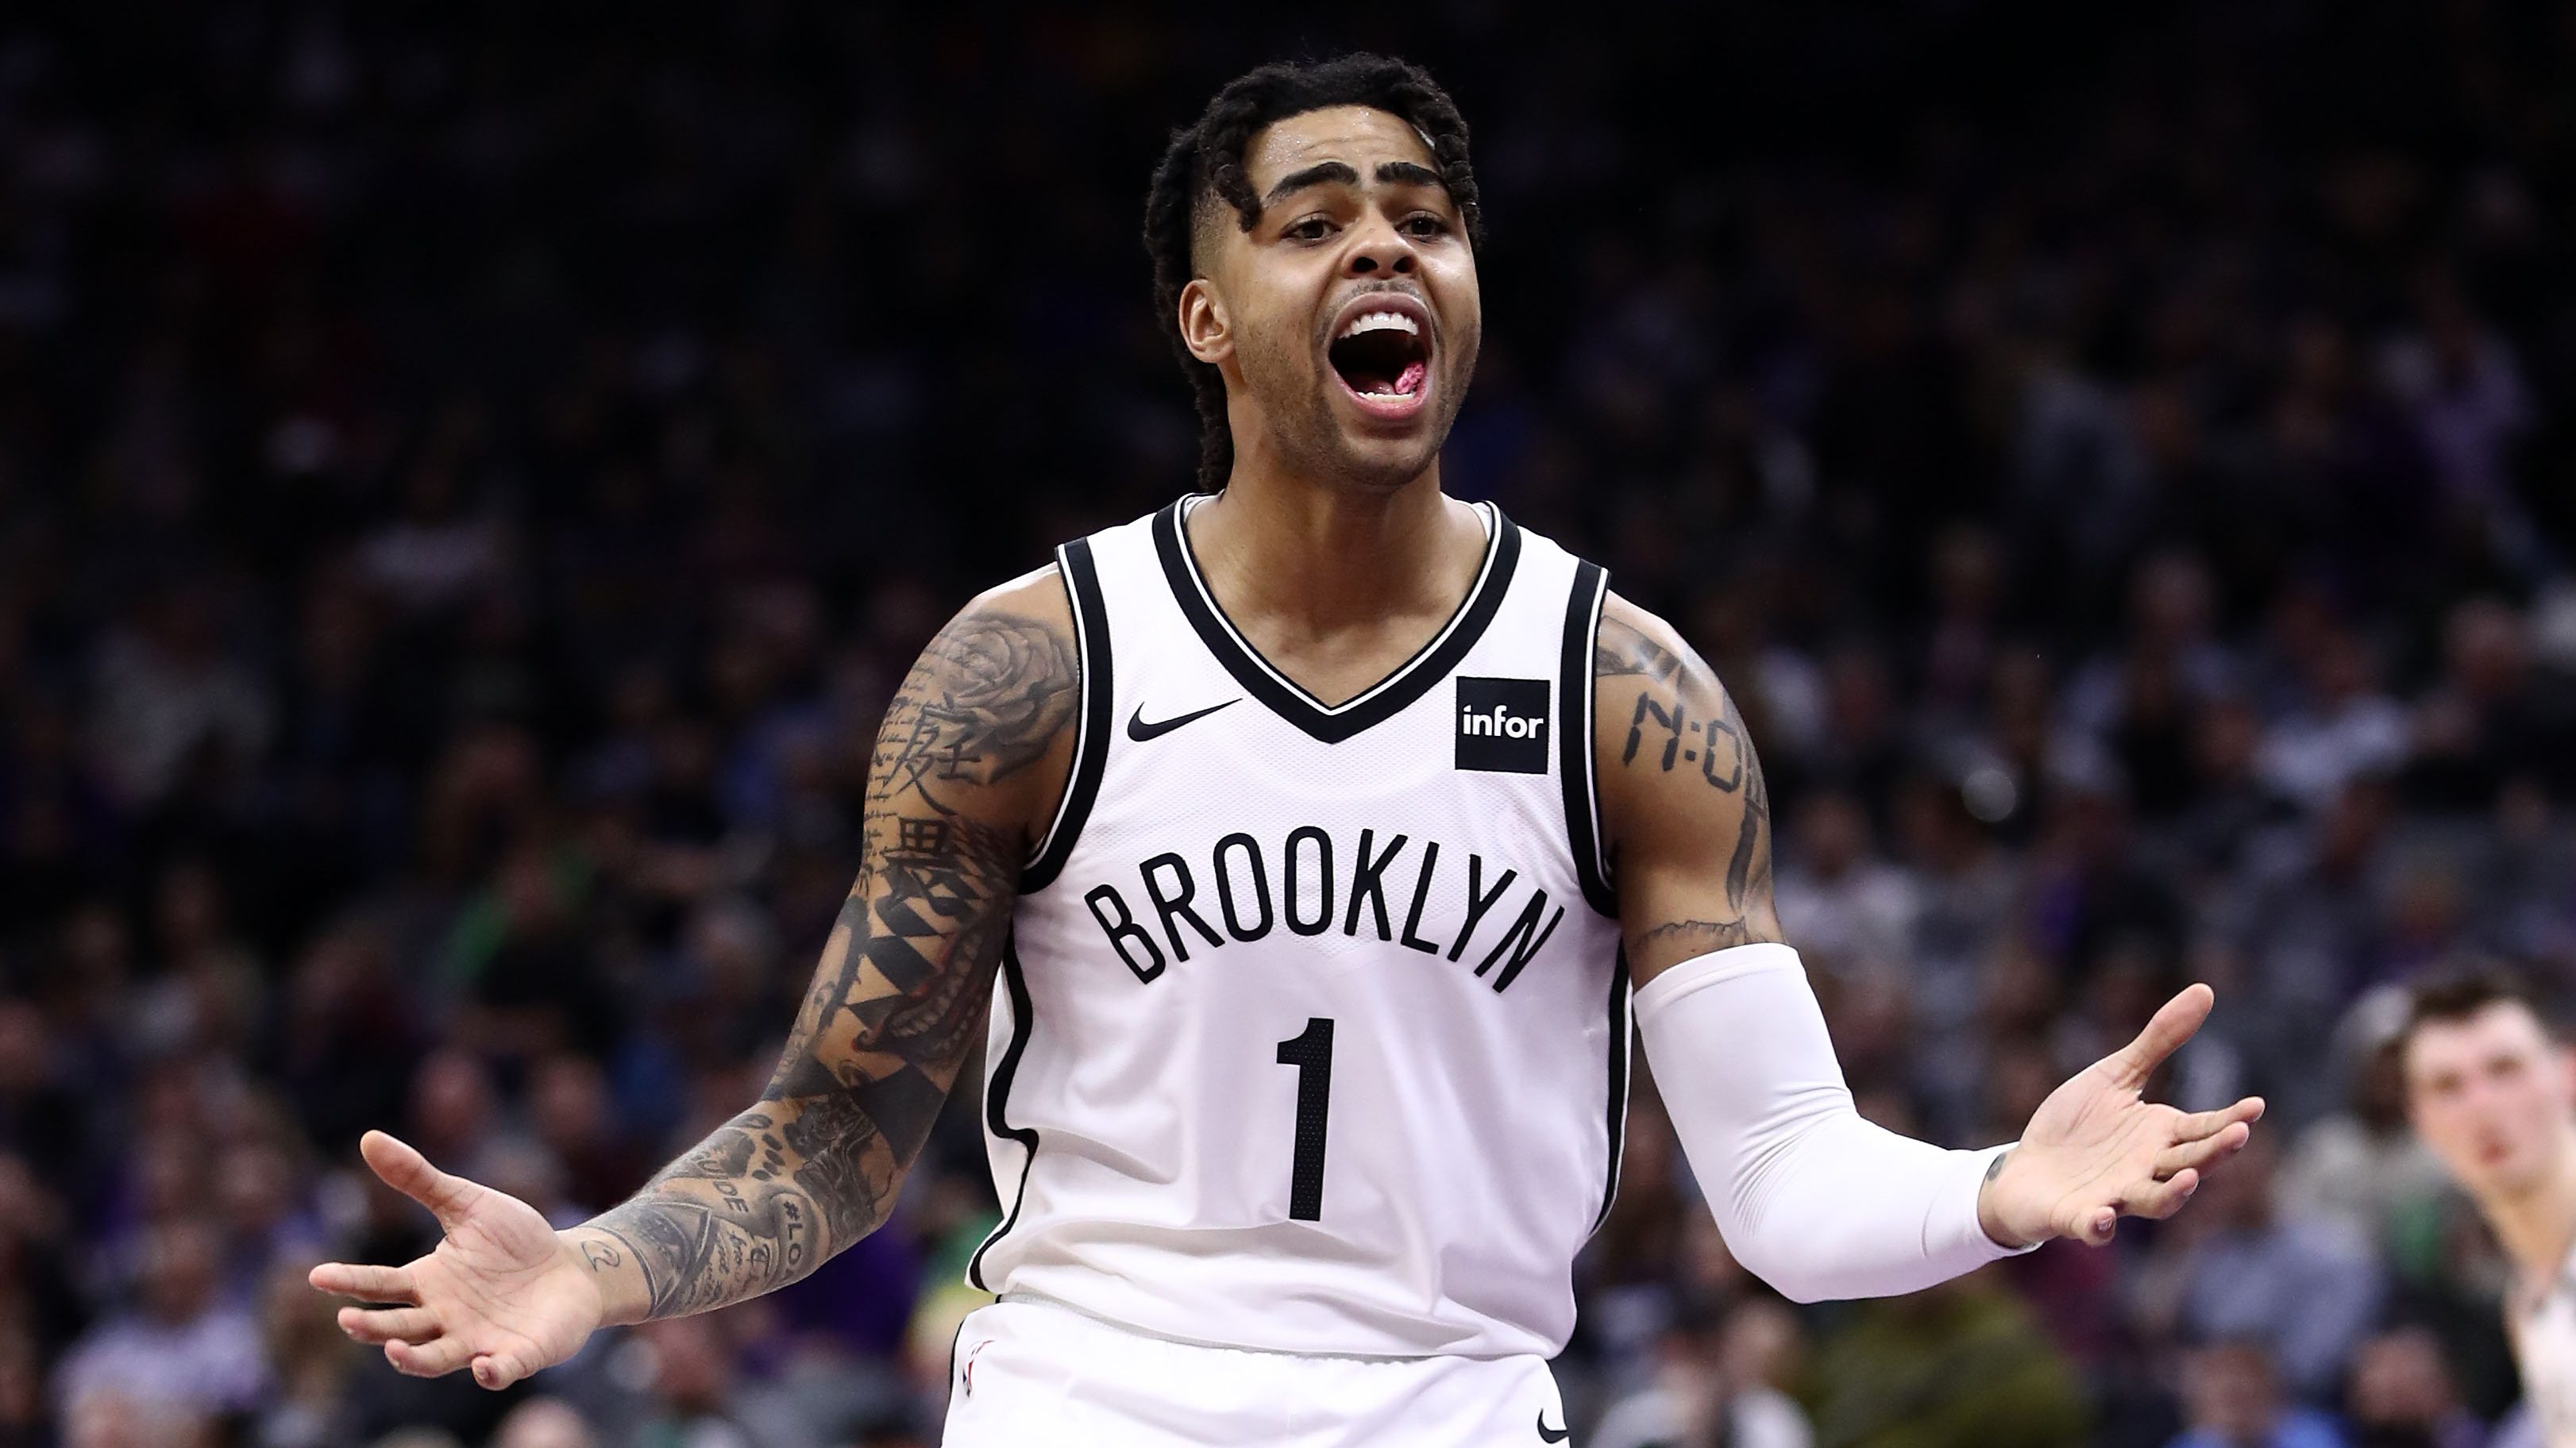 Brooklyn's D'Angelo Russell Named 2019 NBA All-Star